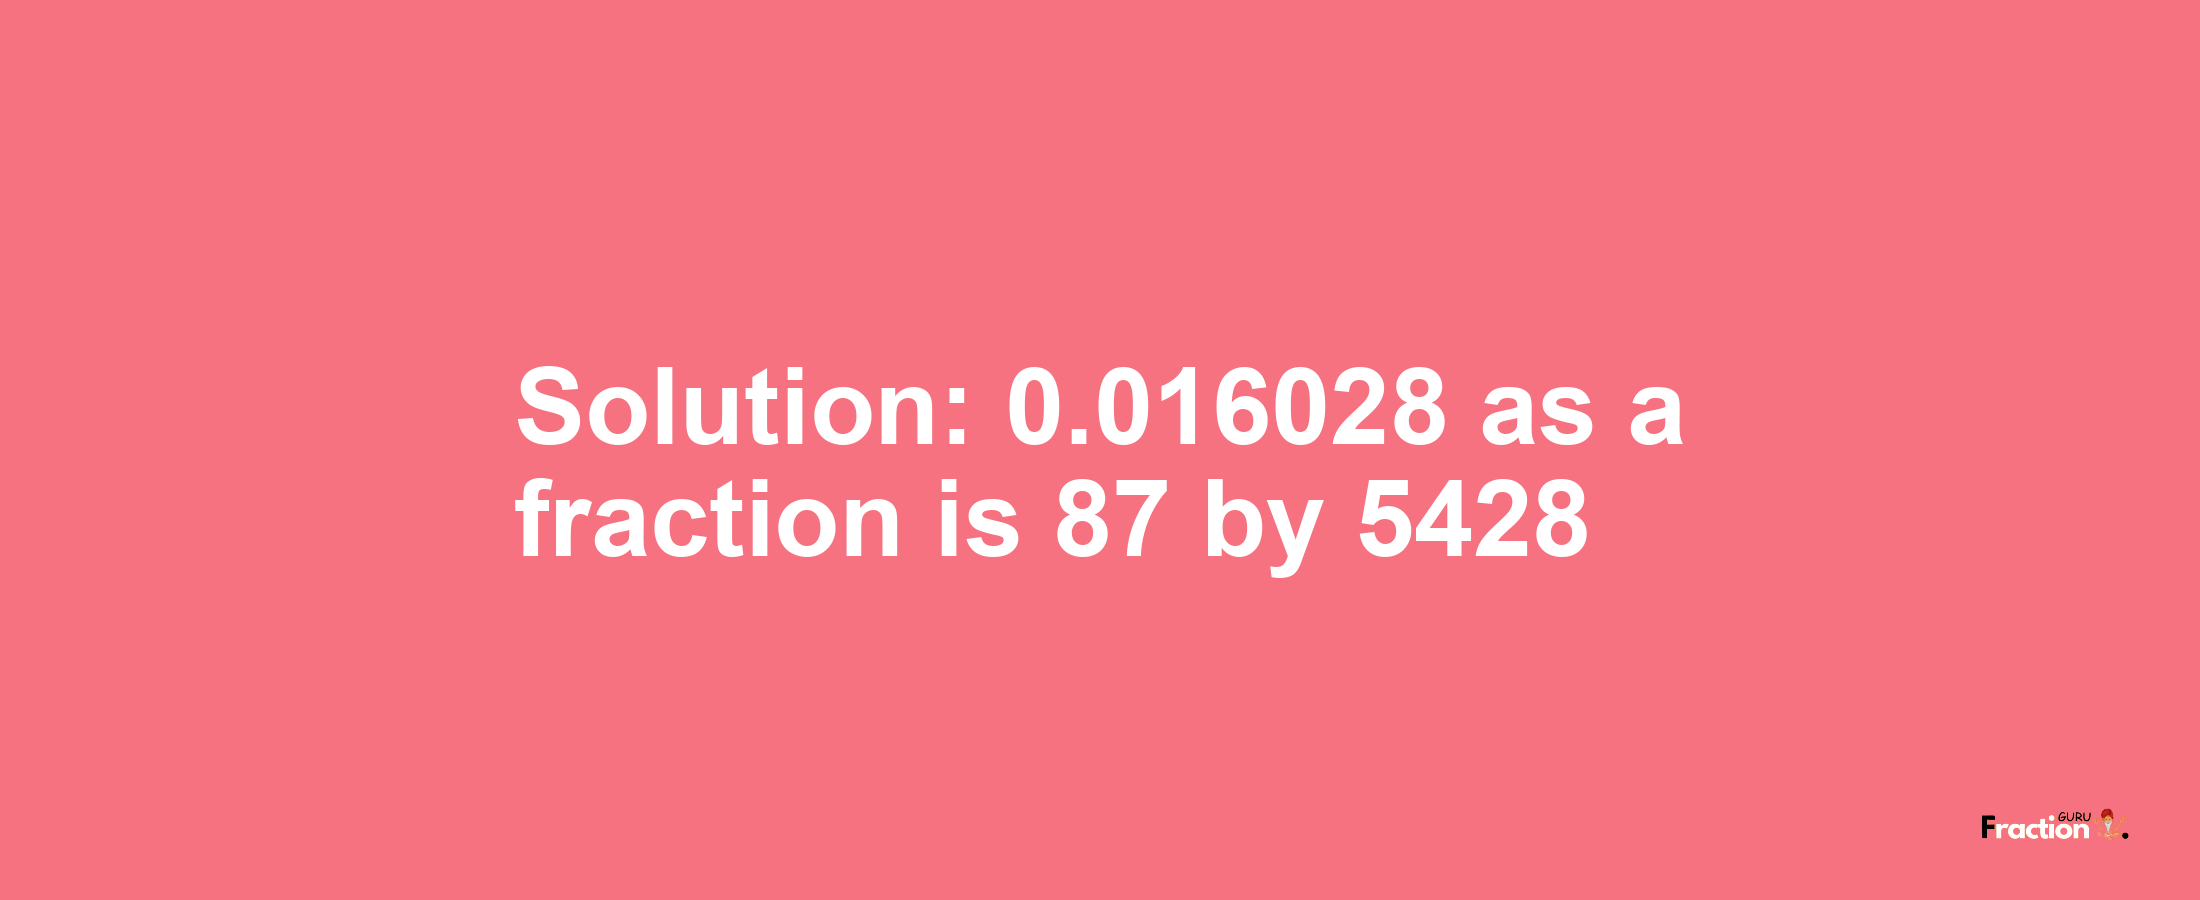 Solution:0.016028 as a fraction is 87/5428